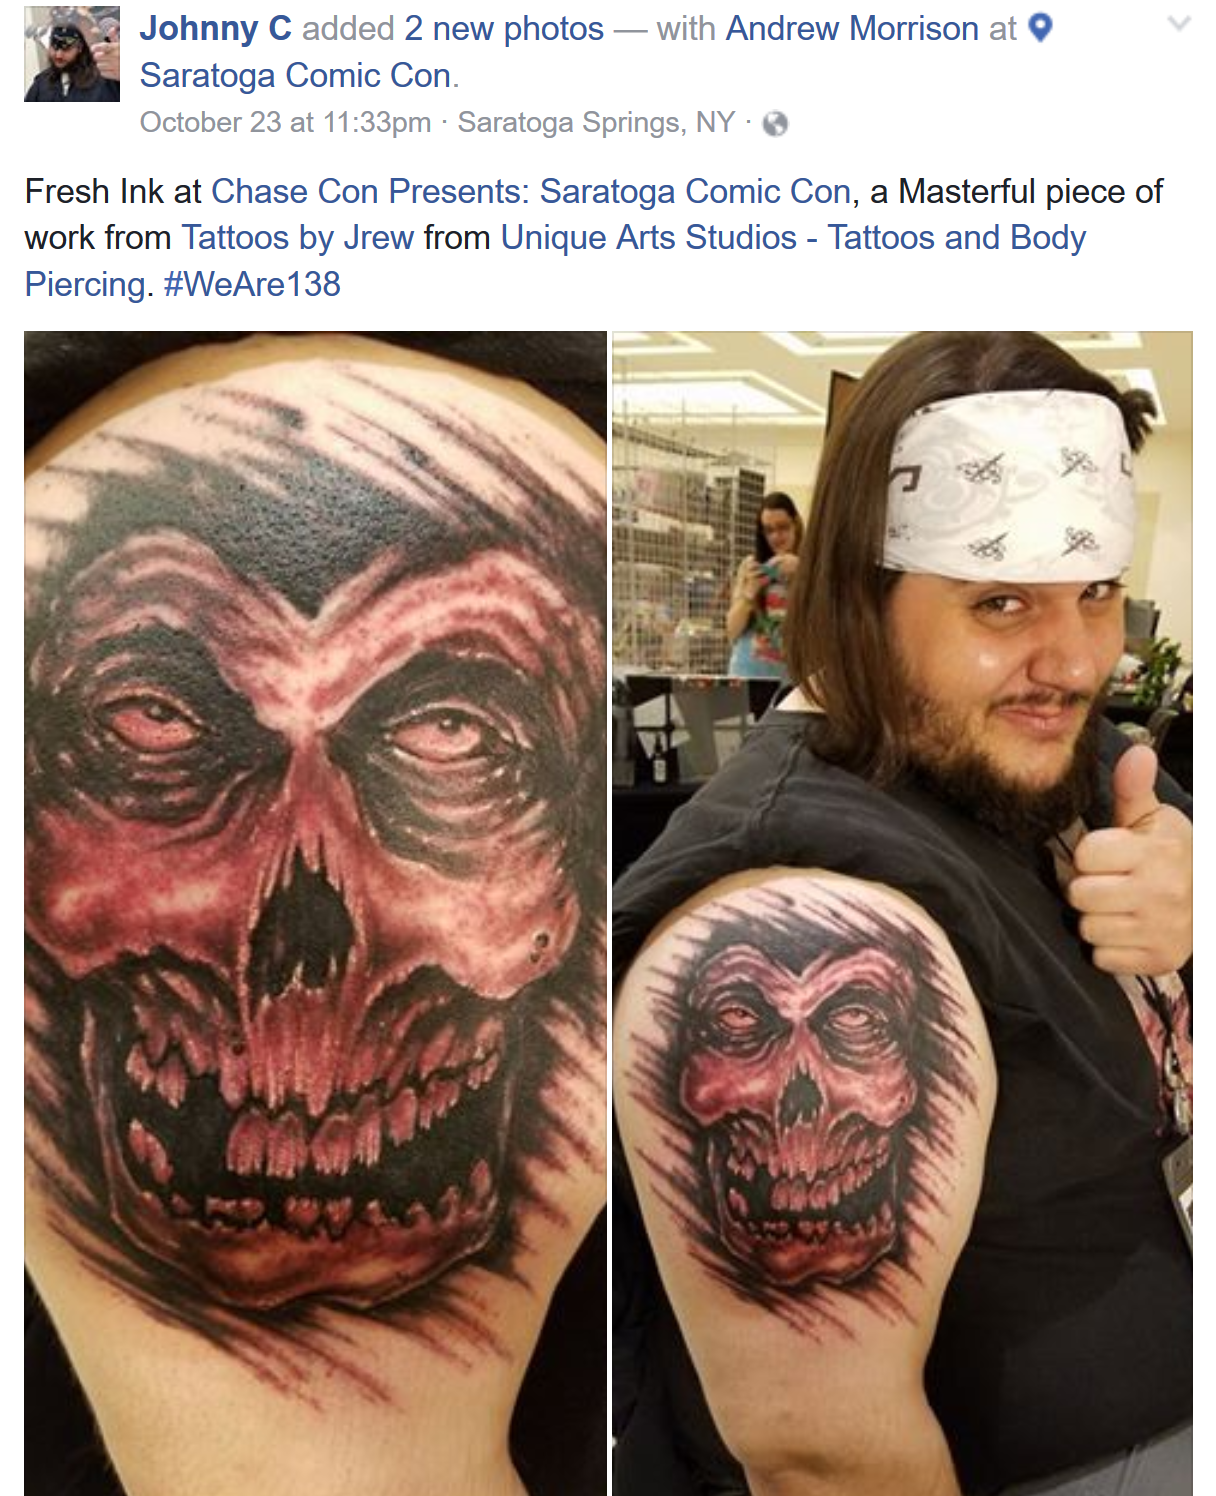 Johnny C shares his new ink from The Saratoga Comic Con with us